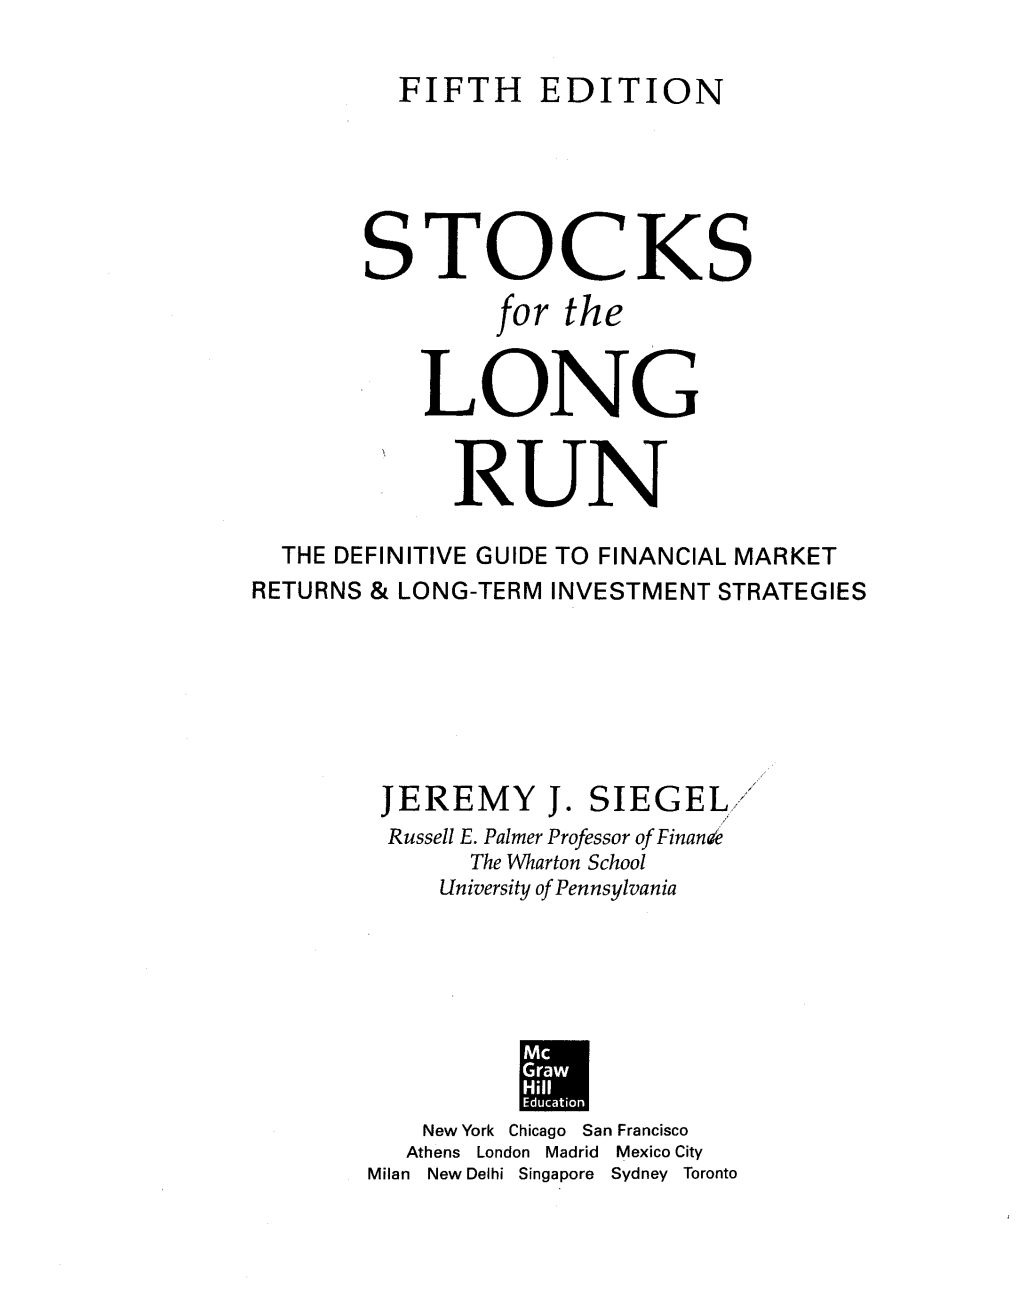 FIFTH EDITION STOCKS for the LONG RUN the DEFINITIVE GUIDE to FINANCIAL MARKET RETURNS & LONG-TERM INVESTMENT STRATEGIES